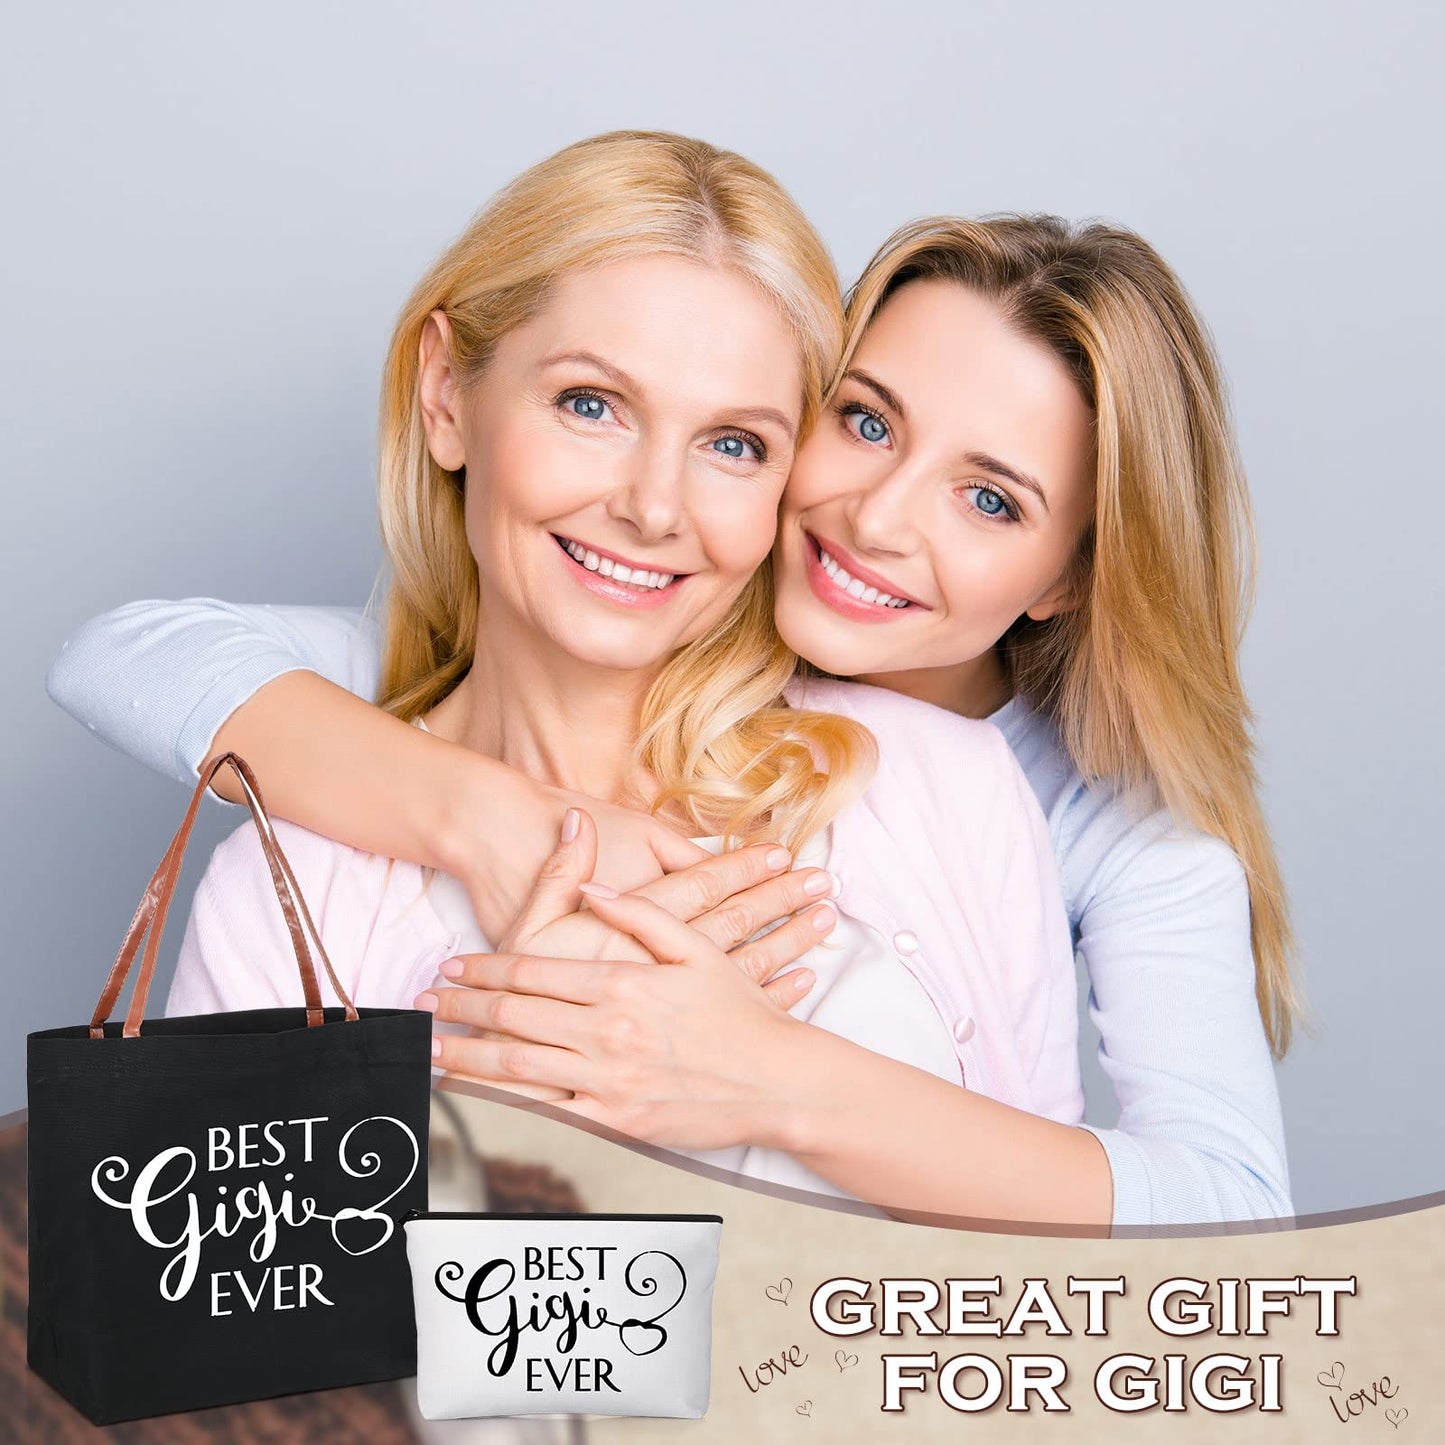 Sieral 2 Pieces Gigi Gifts Mother's Day Gifts Best Ever Tote Bag with Zipper Leather Belt and Make up Bag Grandma Birthday Gifts for Mom Grandma Shopping Beach Travel